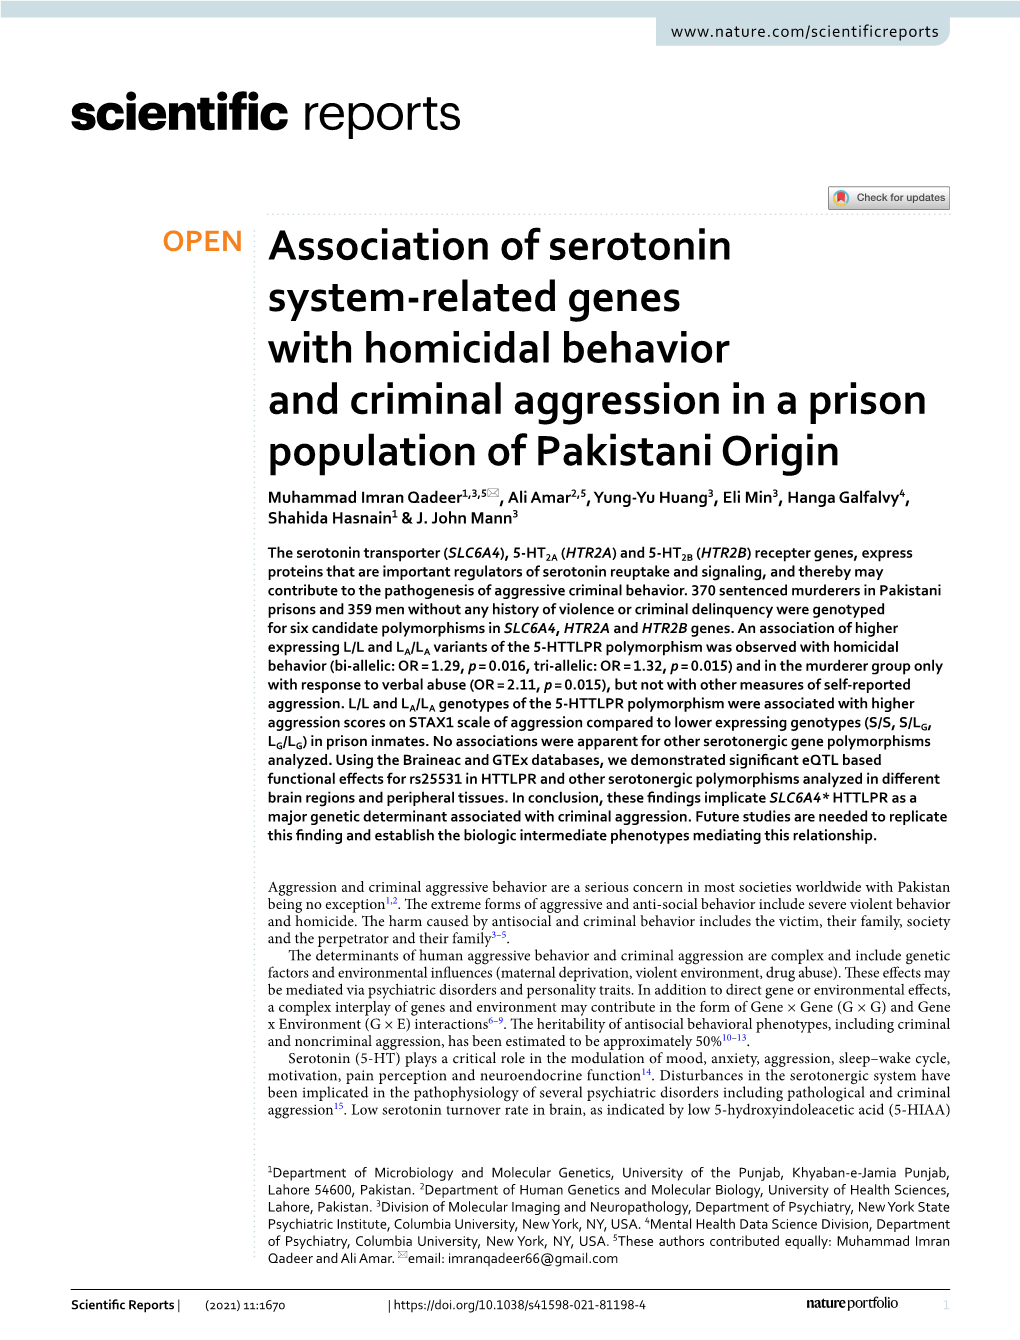 Association of Serotonin System-Related Genes with Homicidal Behavior and Criminal Aggression in a Prison Population of Pakistan